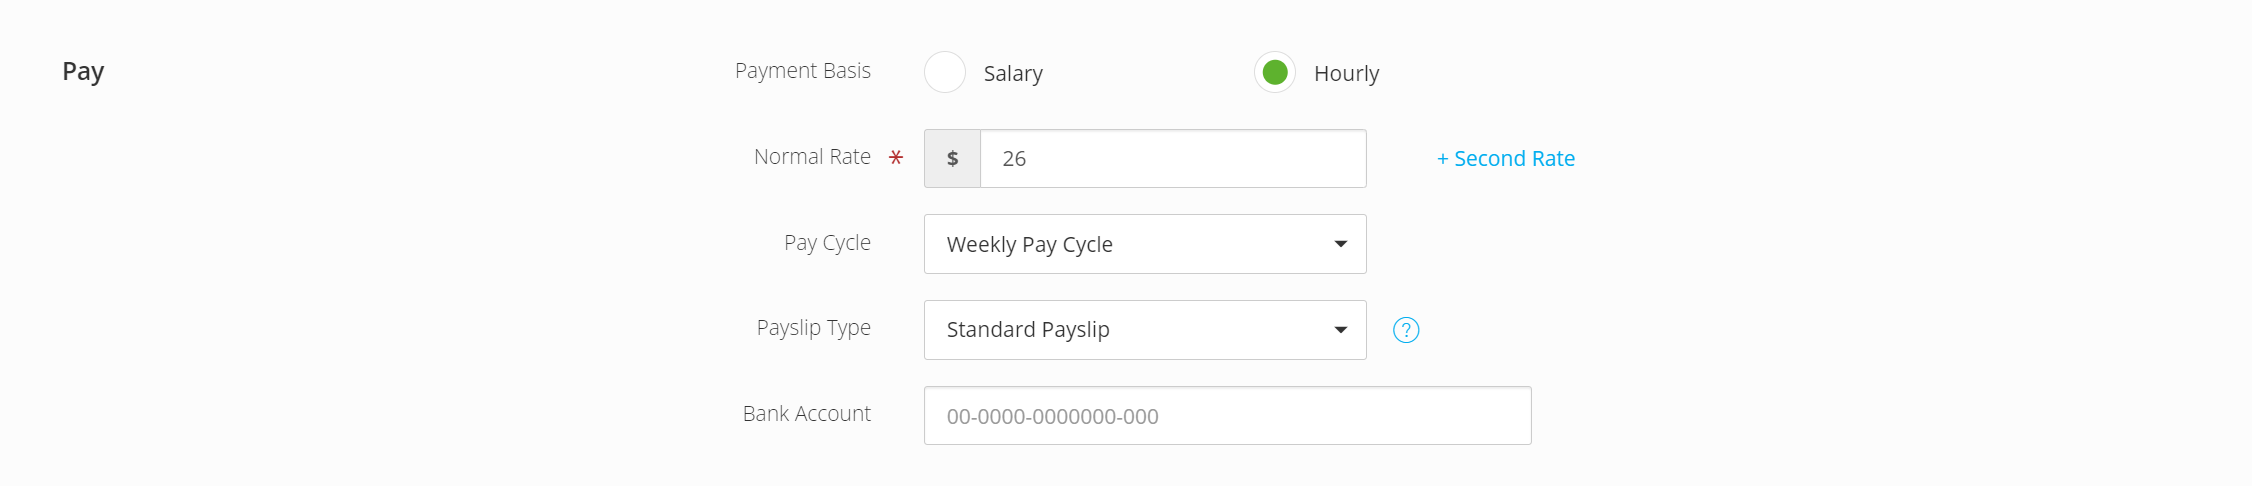 Employment_Details_-_Pay.png